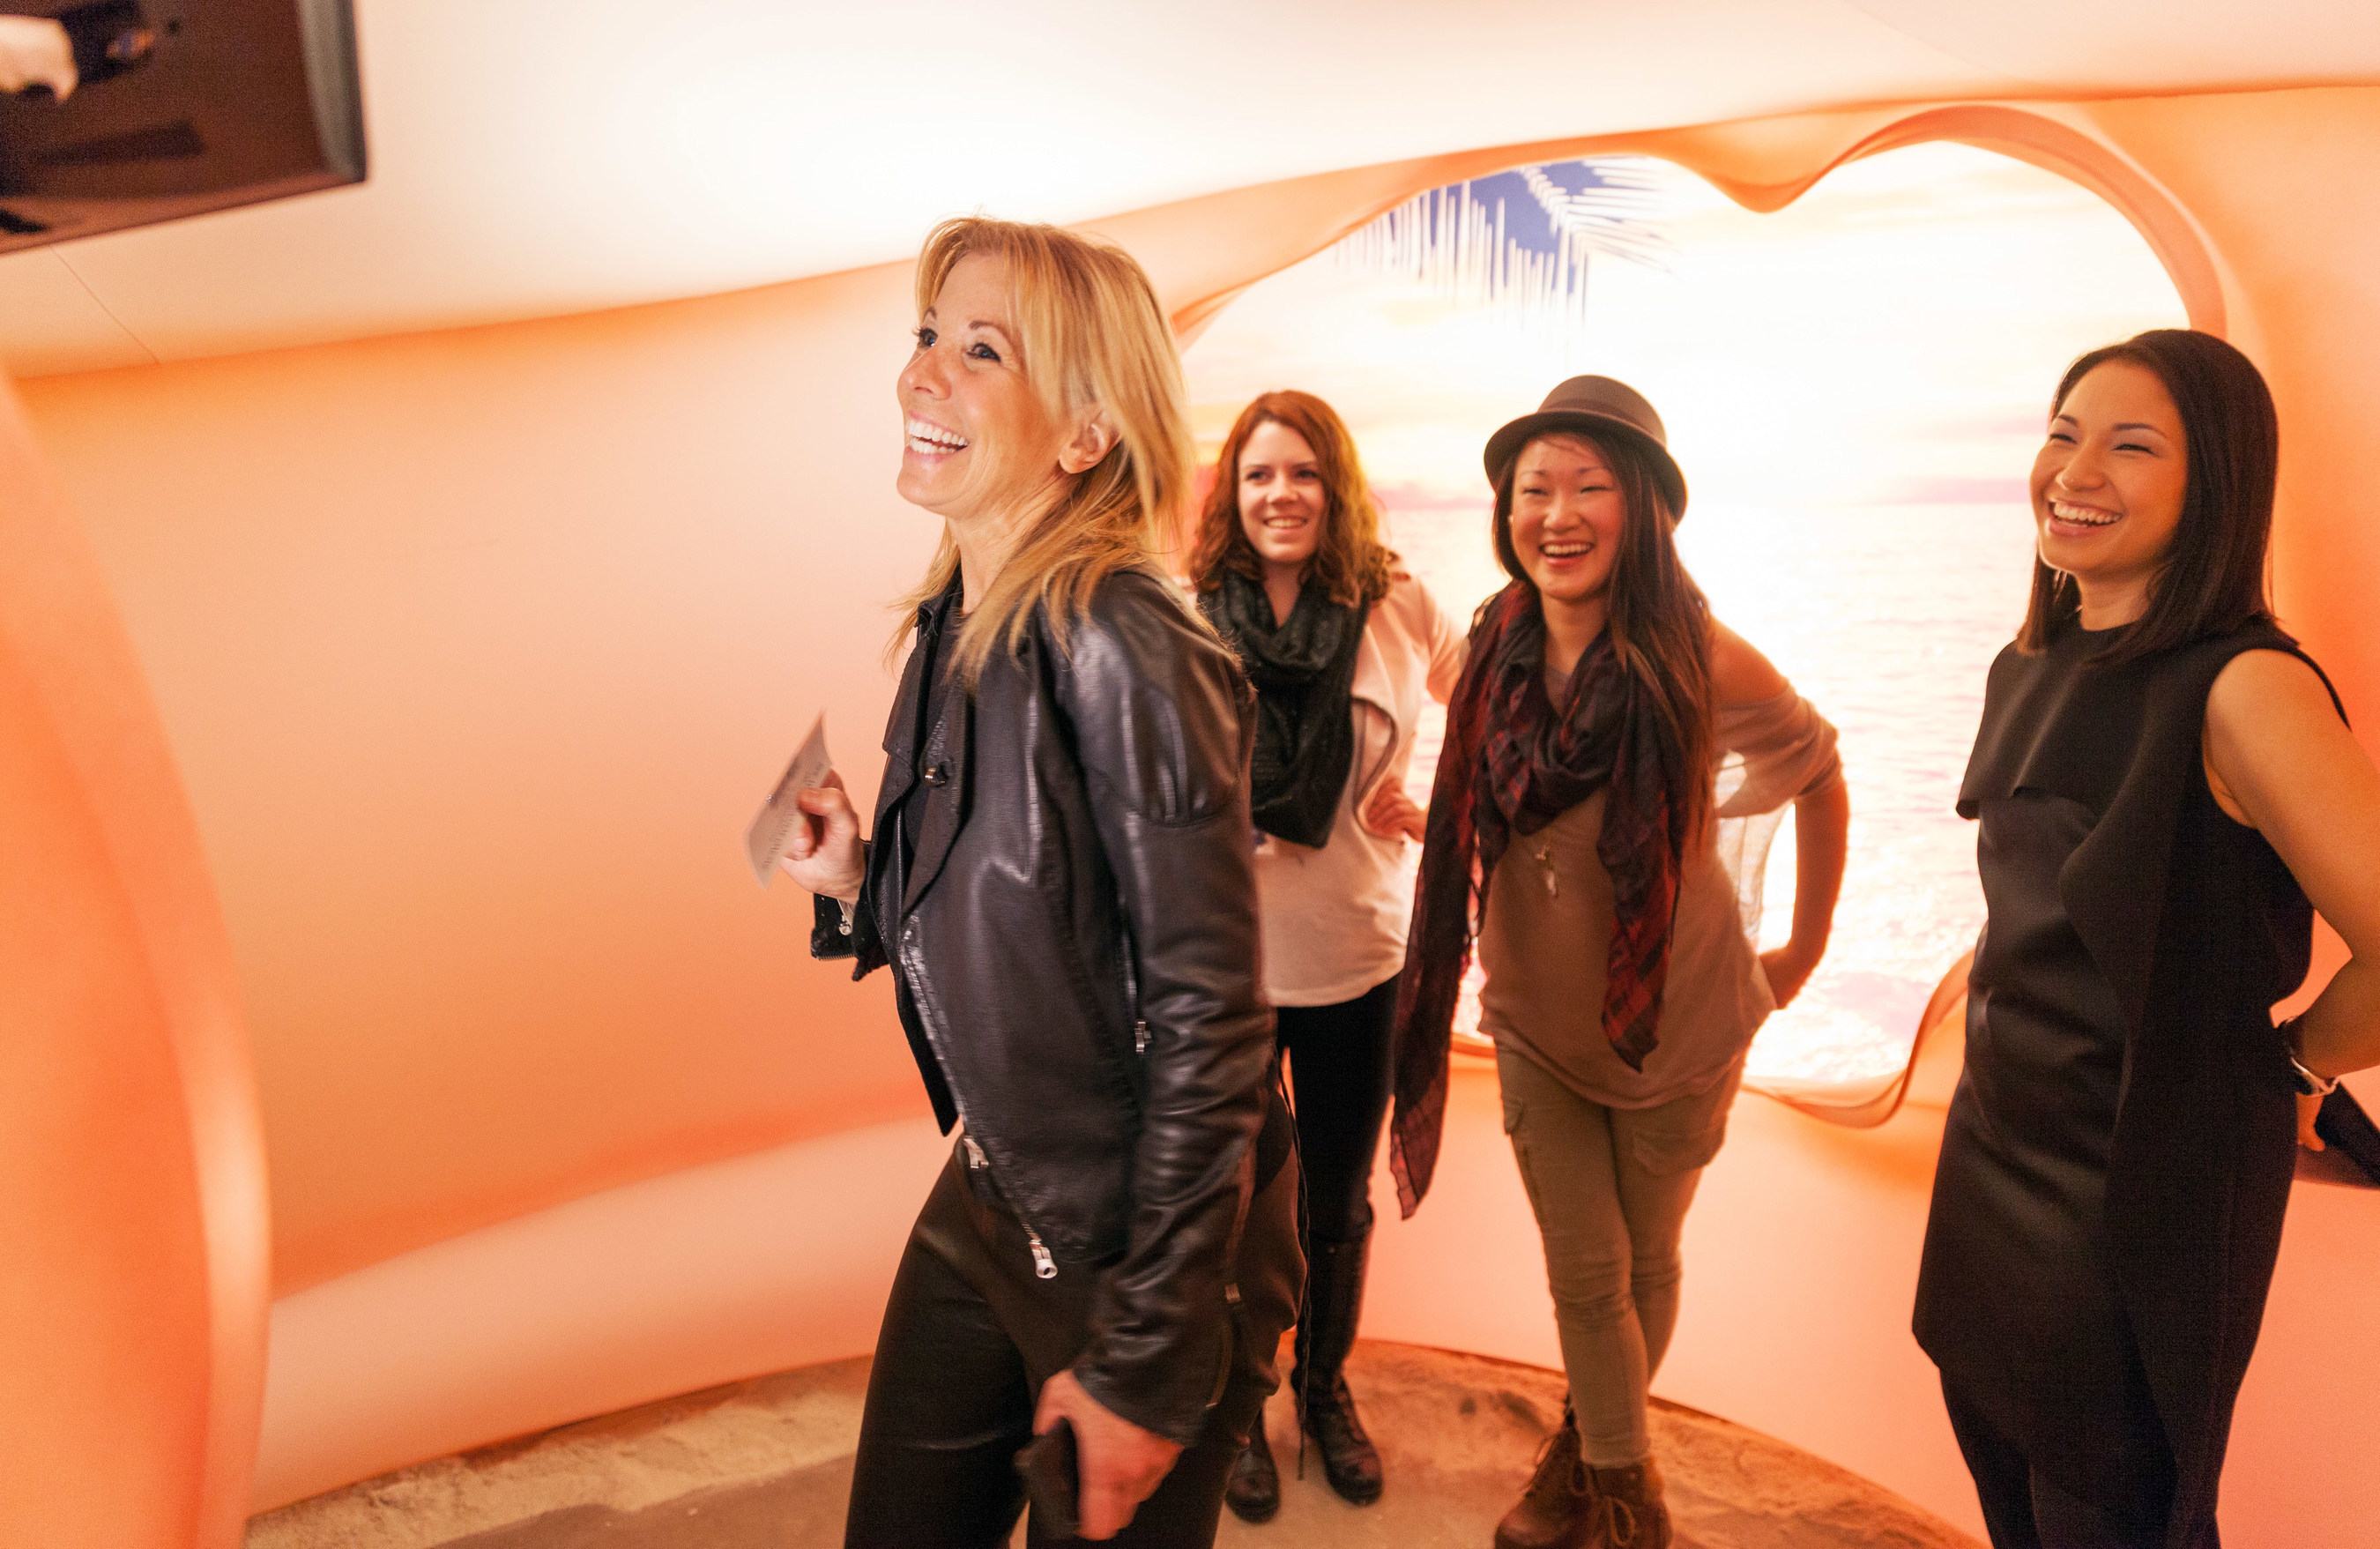 Celebrity fashion designer Pamela Dennis, left, Erin Cassidy, second from left, Cassandra Dotzel, center and New York-based designer and architect Stephanie Goto capture a relaxed moment at the Glade(R) Boutique Grand Opening Monday, Nov. 17, 2014 in New York. The Glade(R) Boutique is open from Tuesday Nov. 18 to Tuesday Dec. 23, 2014. Photo by Glade(R)